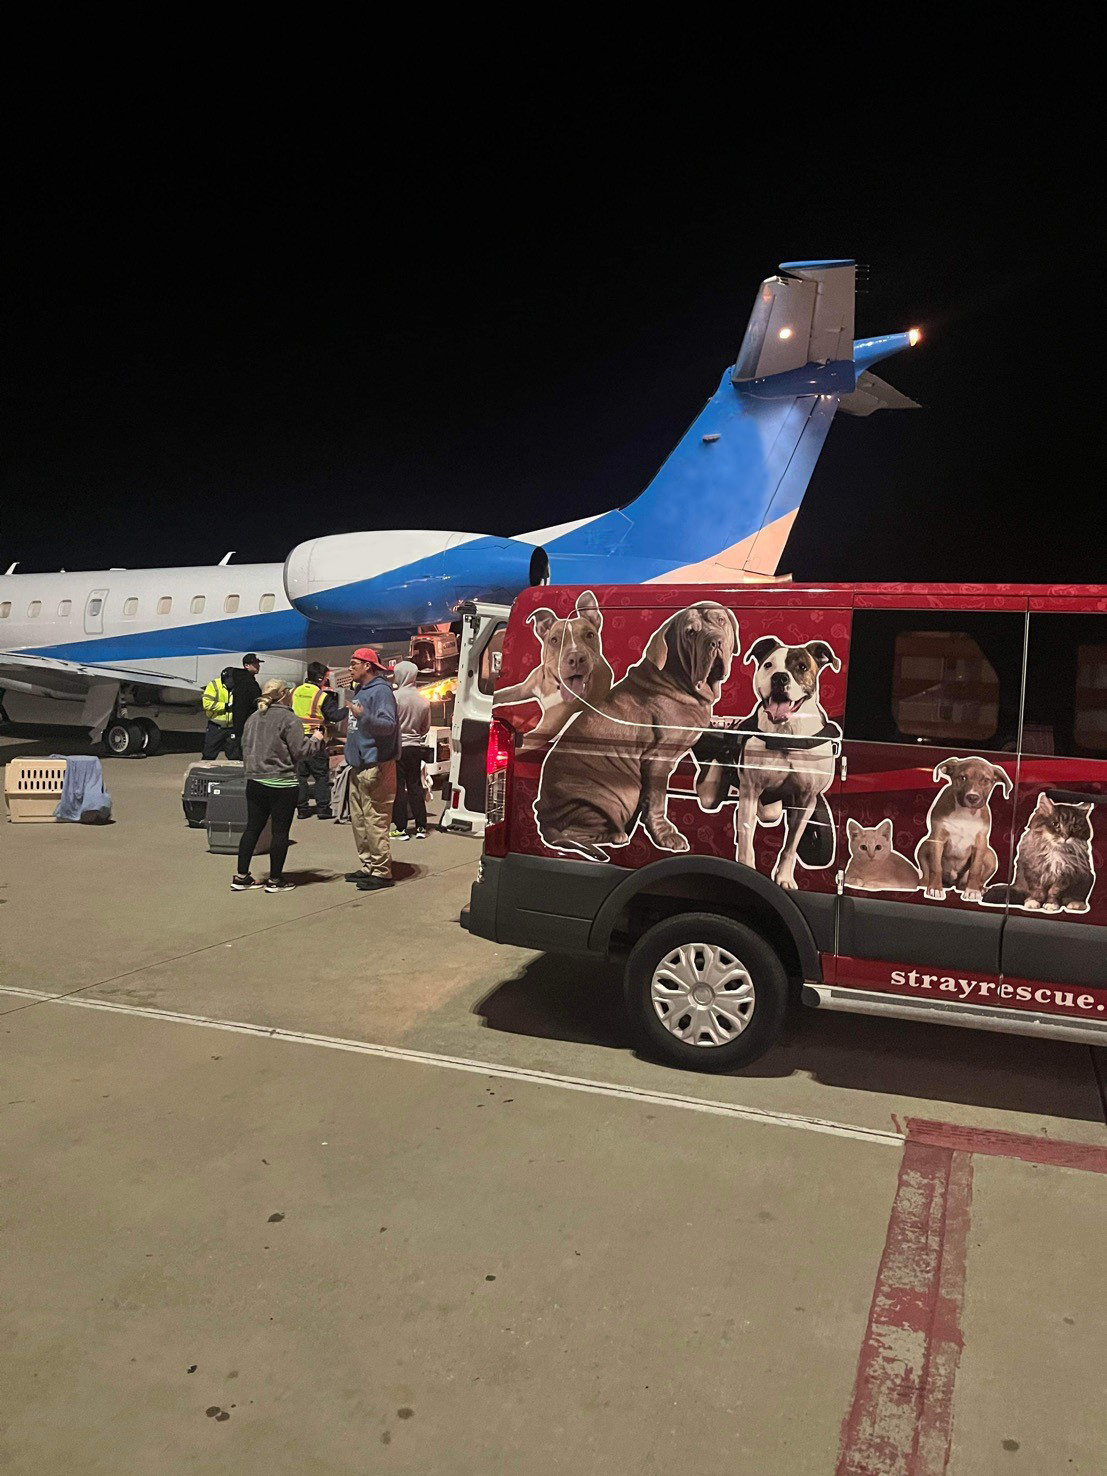 Jet Aviation St. Louis with Saint Louis animal stray and rescue association